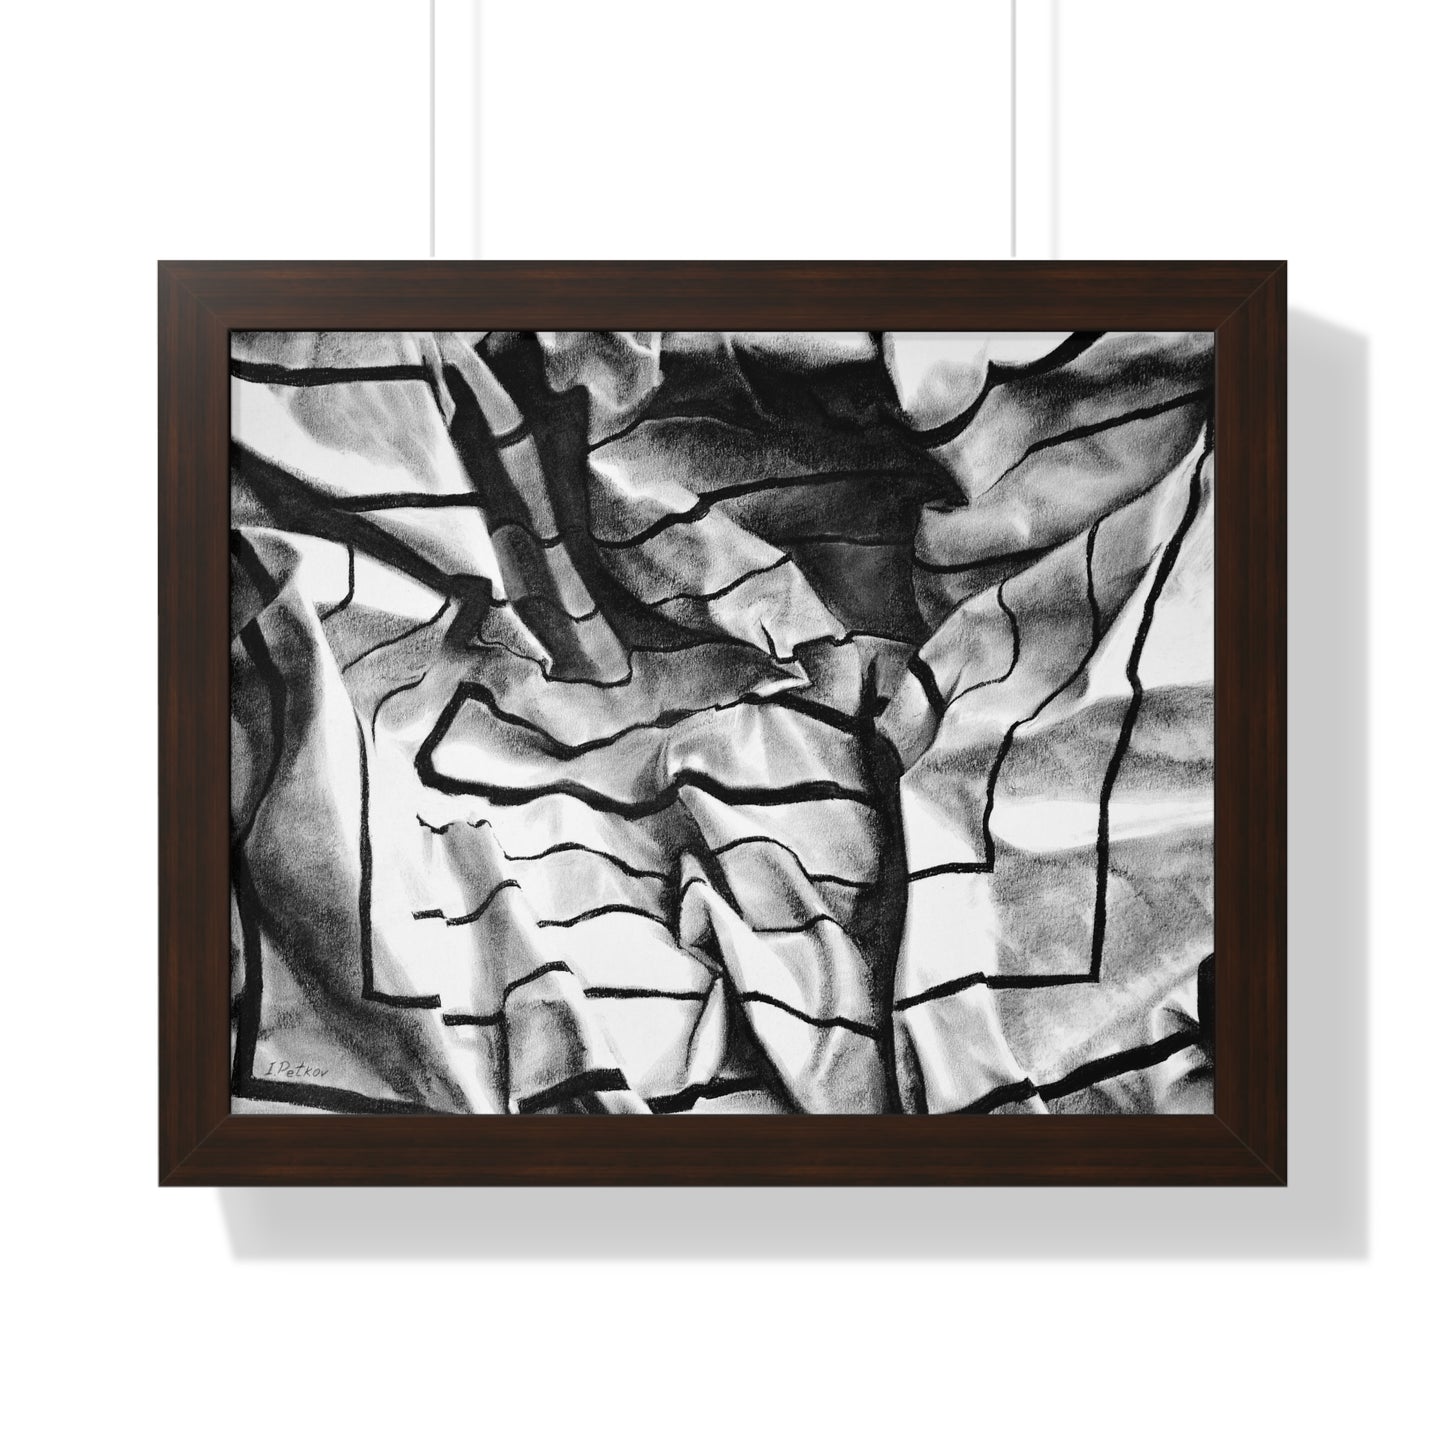 Folding Structure I - Framed Poster Print, Wall Art, Charcoal, Abstract Black and White Decor